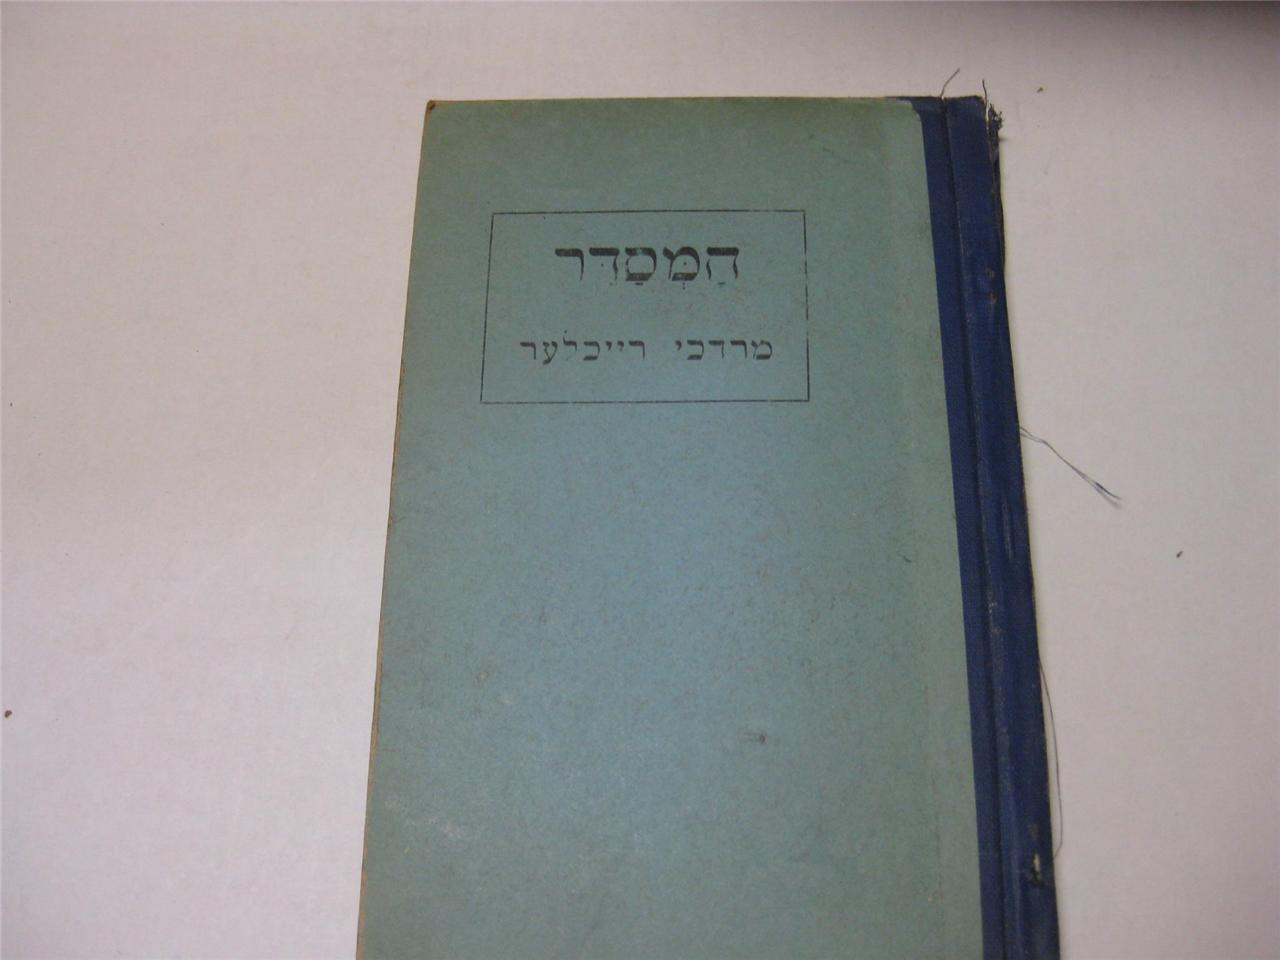 HAMESADER Hebrew manual : an introduction to the prayer book by Max Reichler